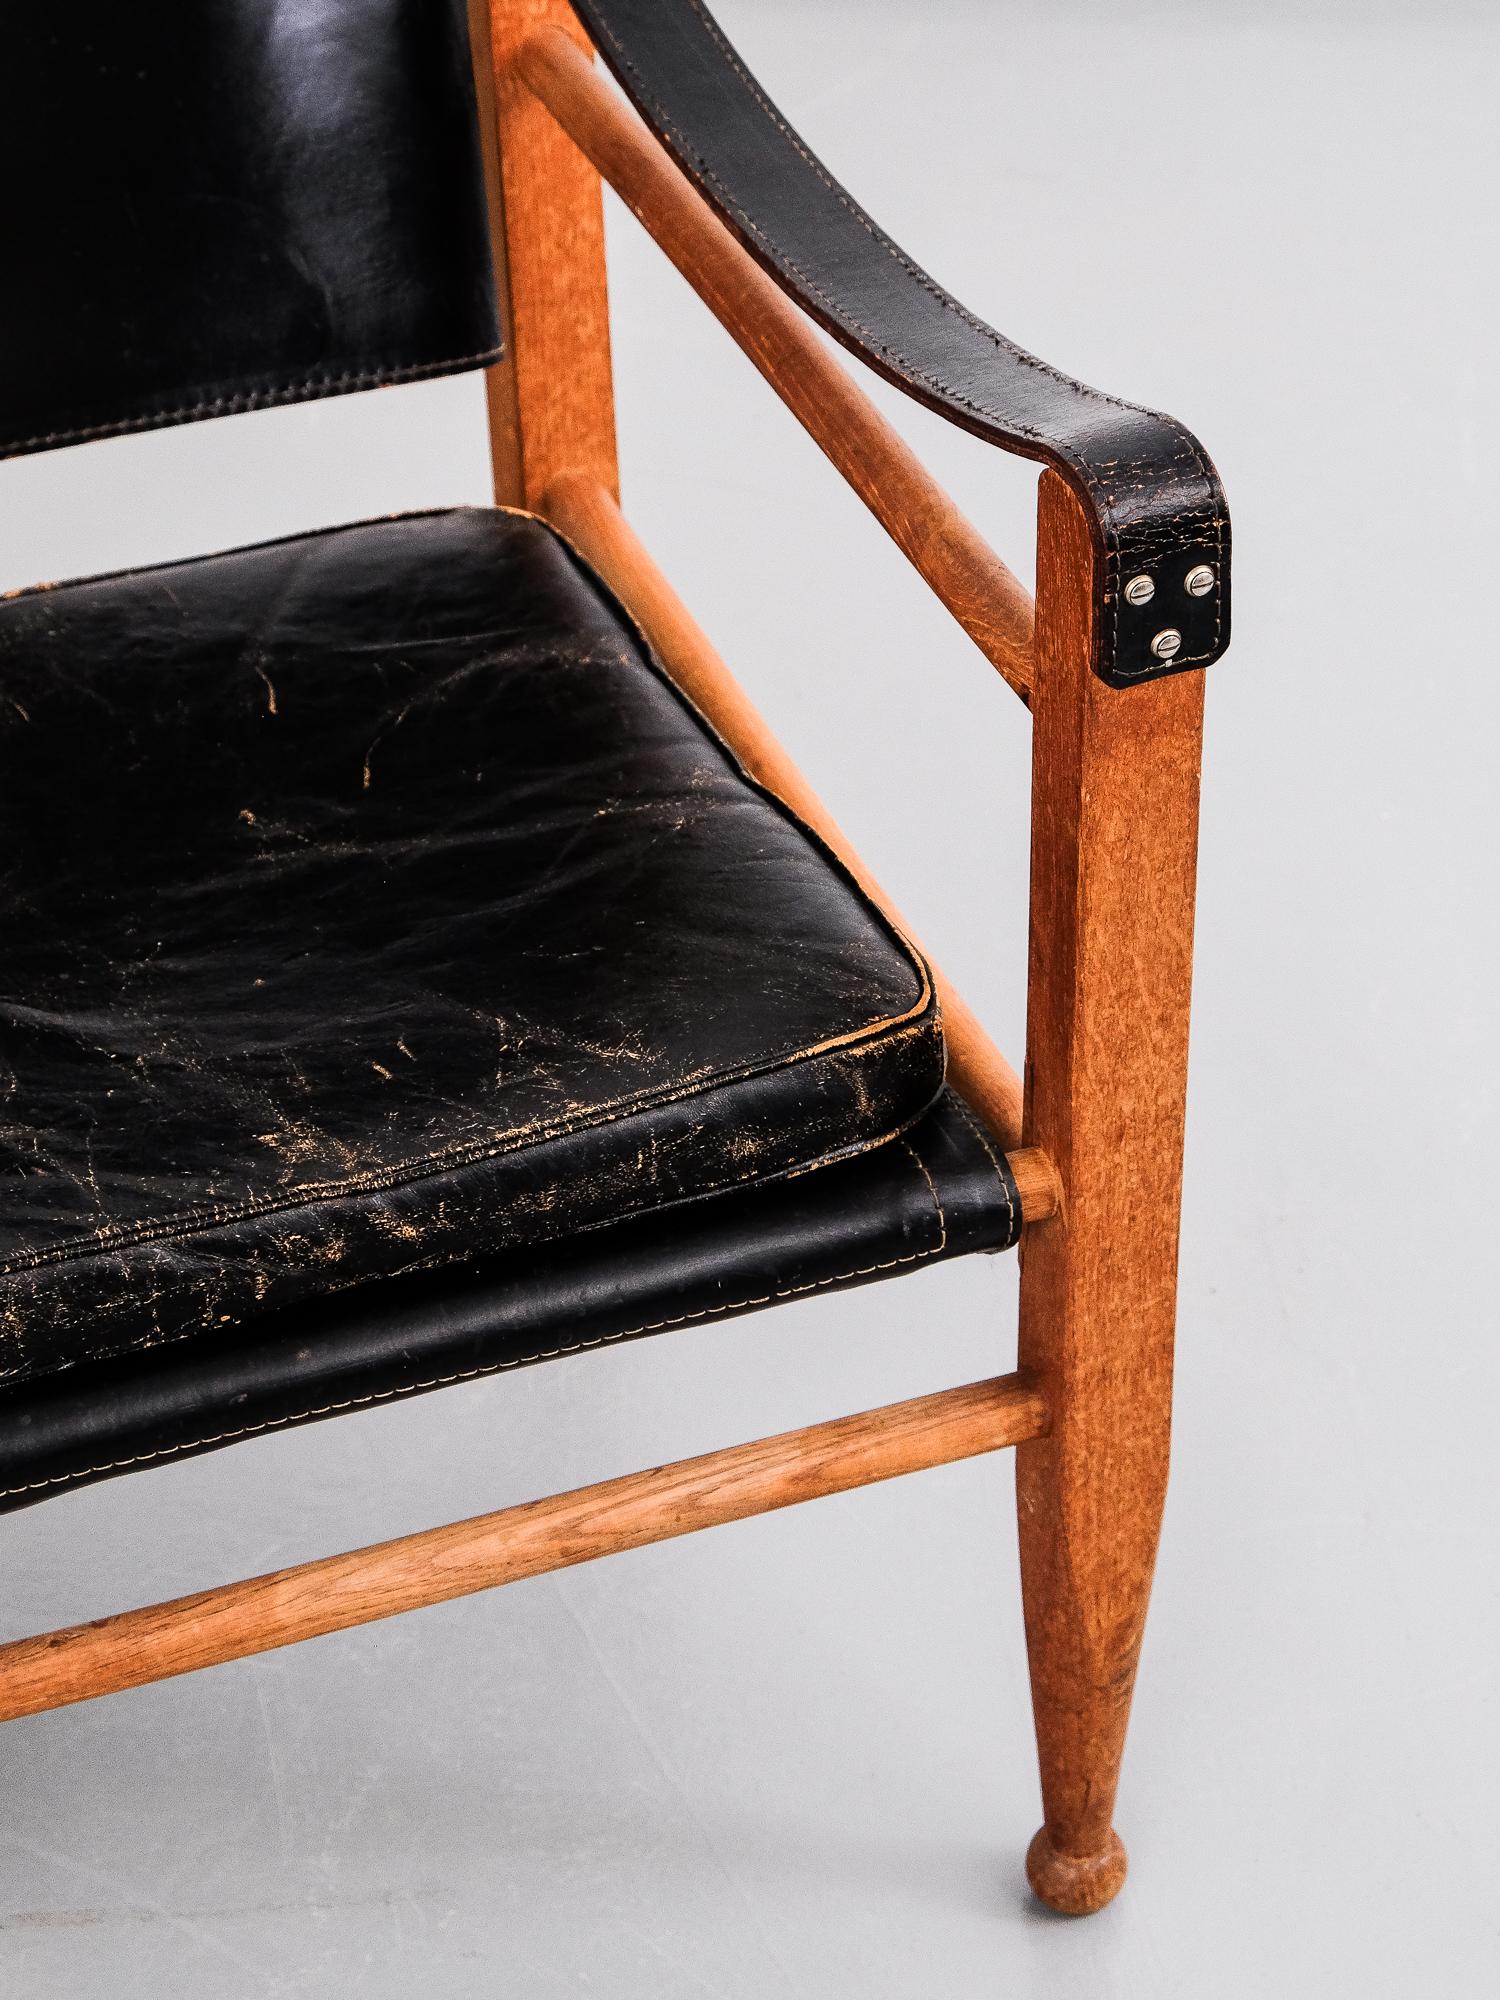 Midcentury Aage Bruun & Søn Safari chair in patinated black leather and solid oak. Excellent patina, Denmark, 1960s.